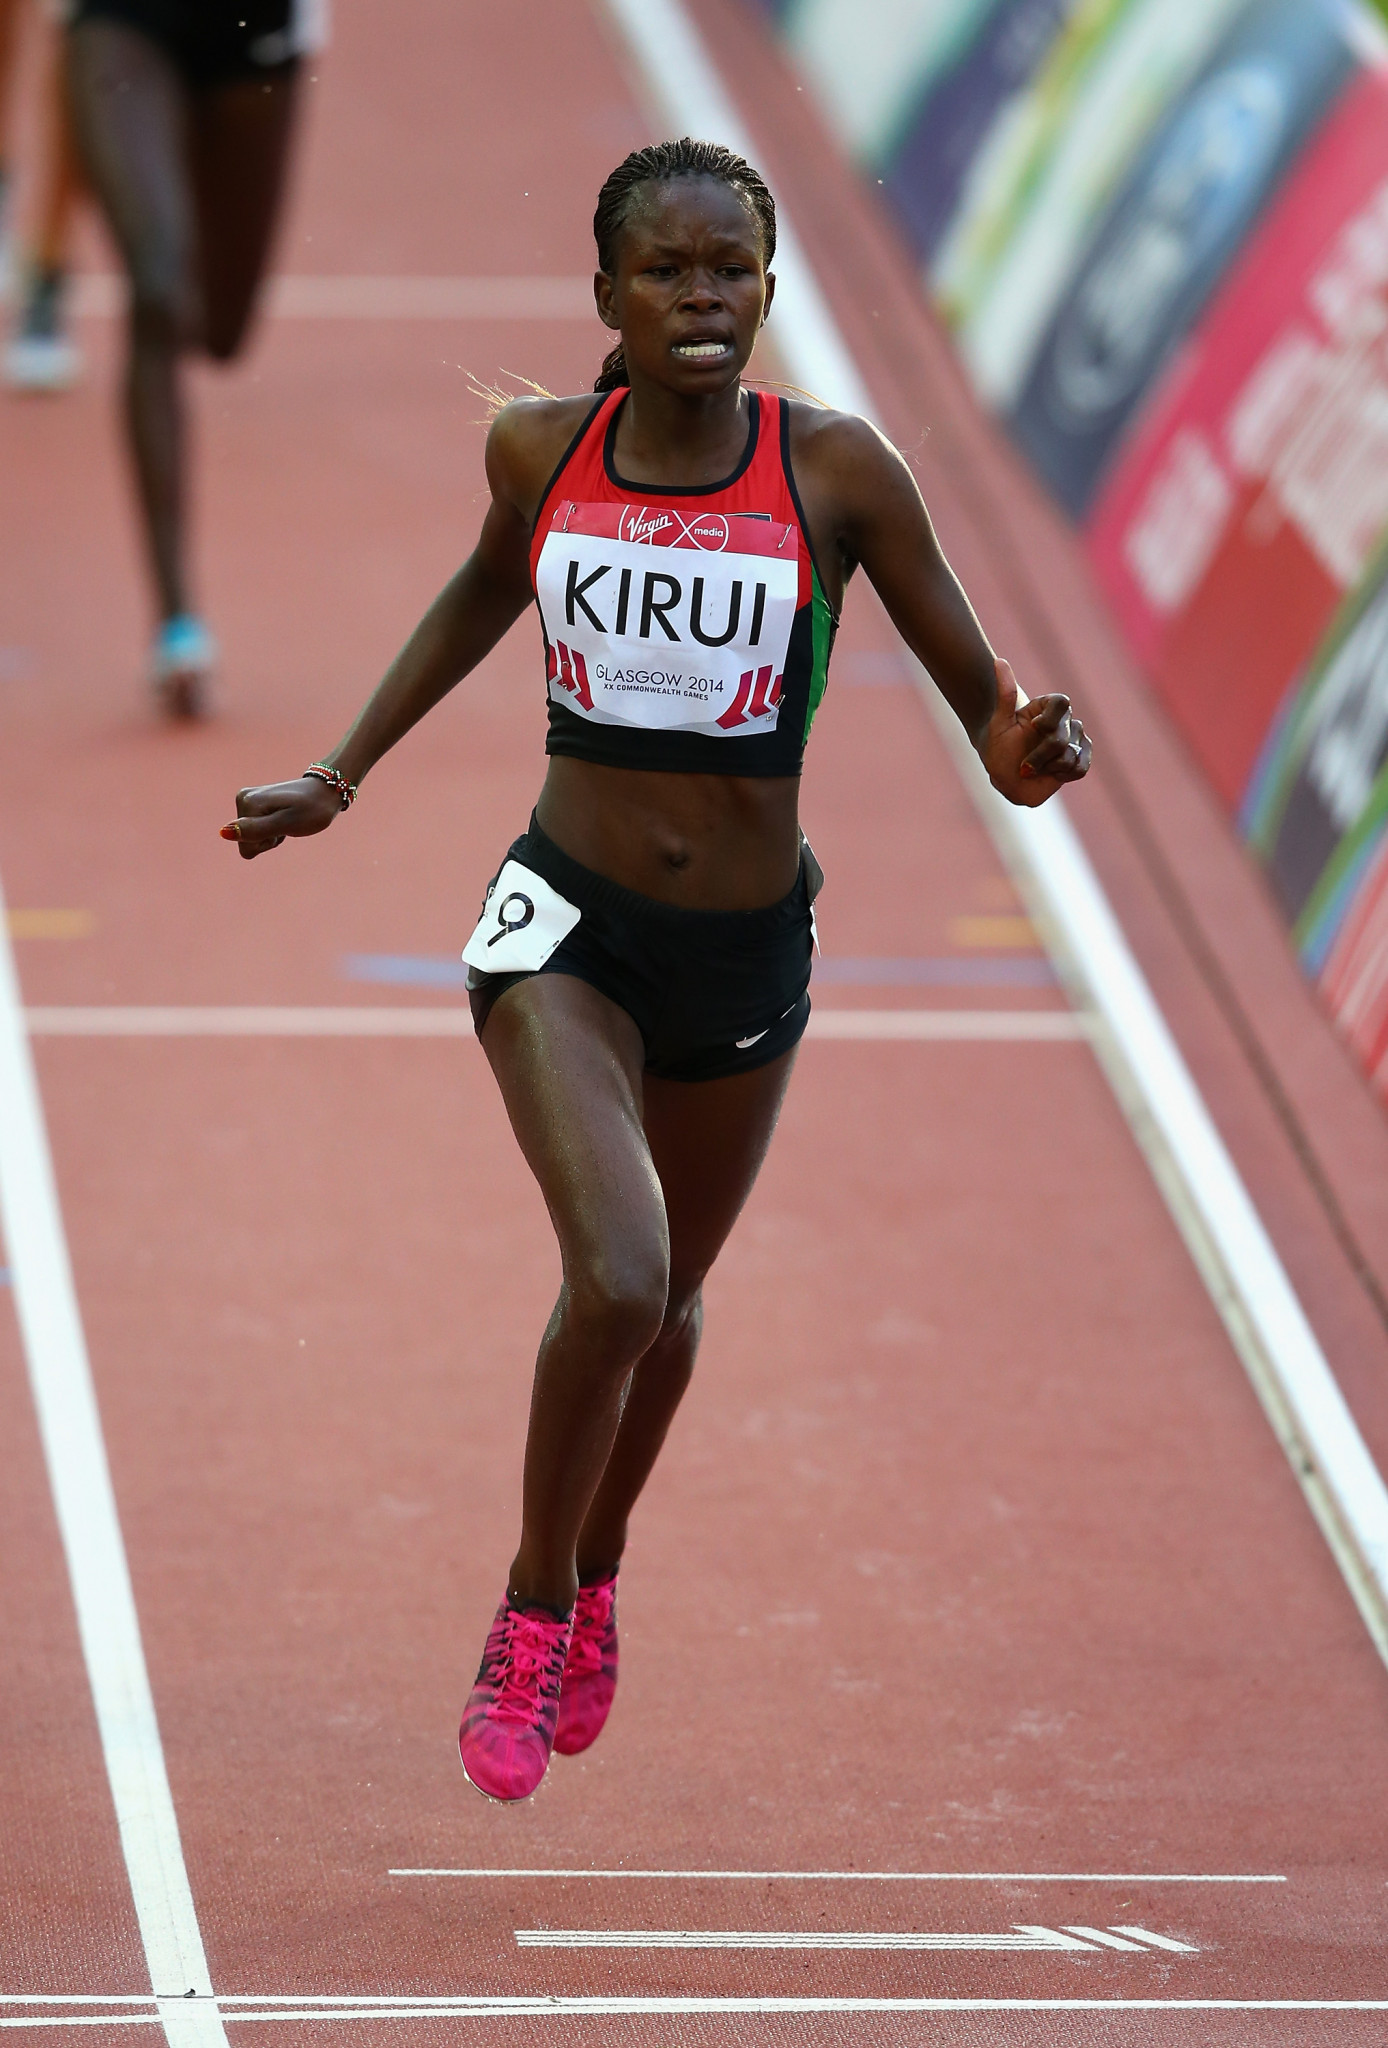 Purity Kirui, winner of the 3,000m steeplechase at Glasgow 2014, hopes to be among the champions from Kenya defending their title at Gold Coast 2018 ©Getty Images